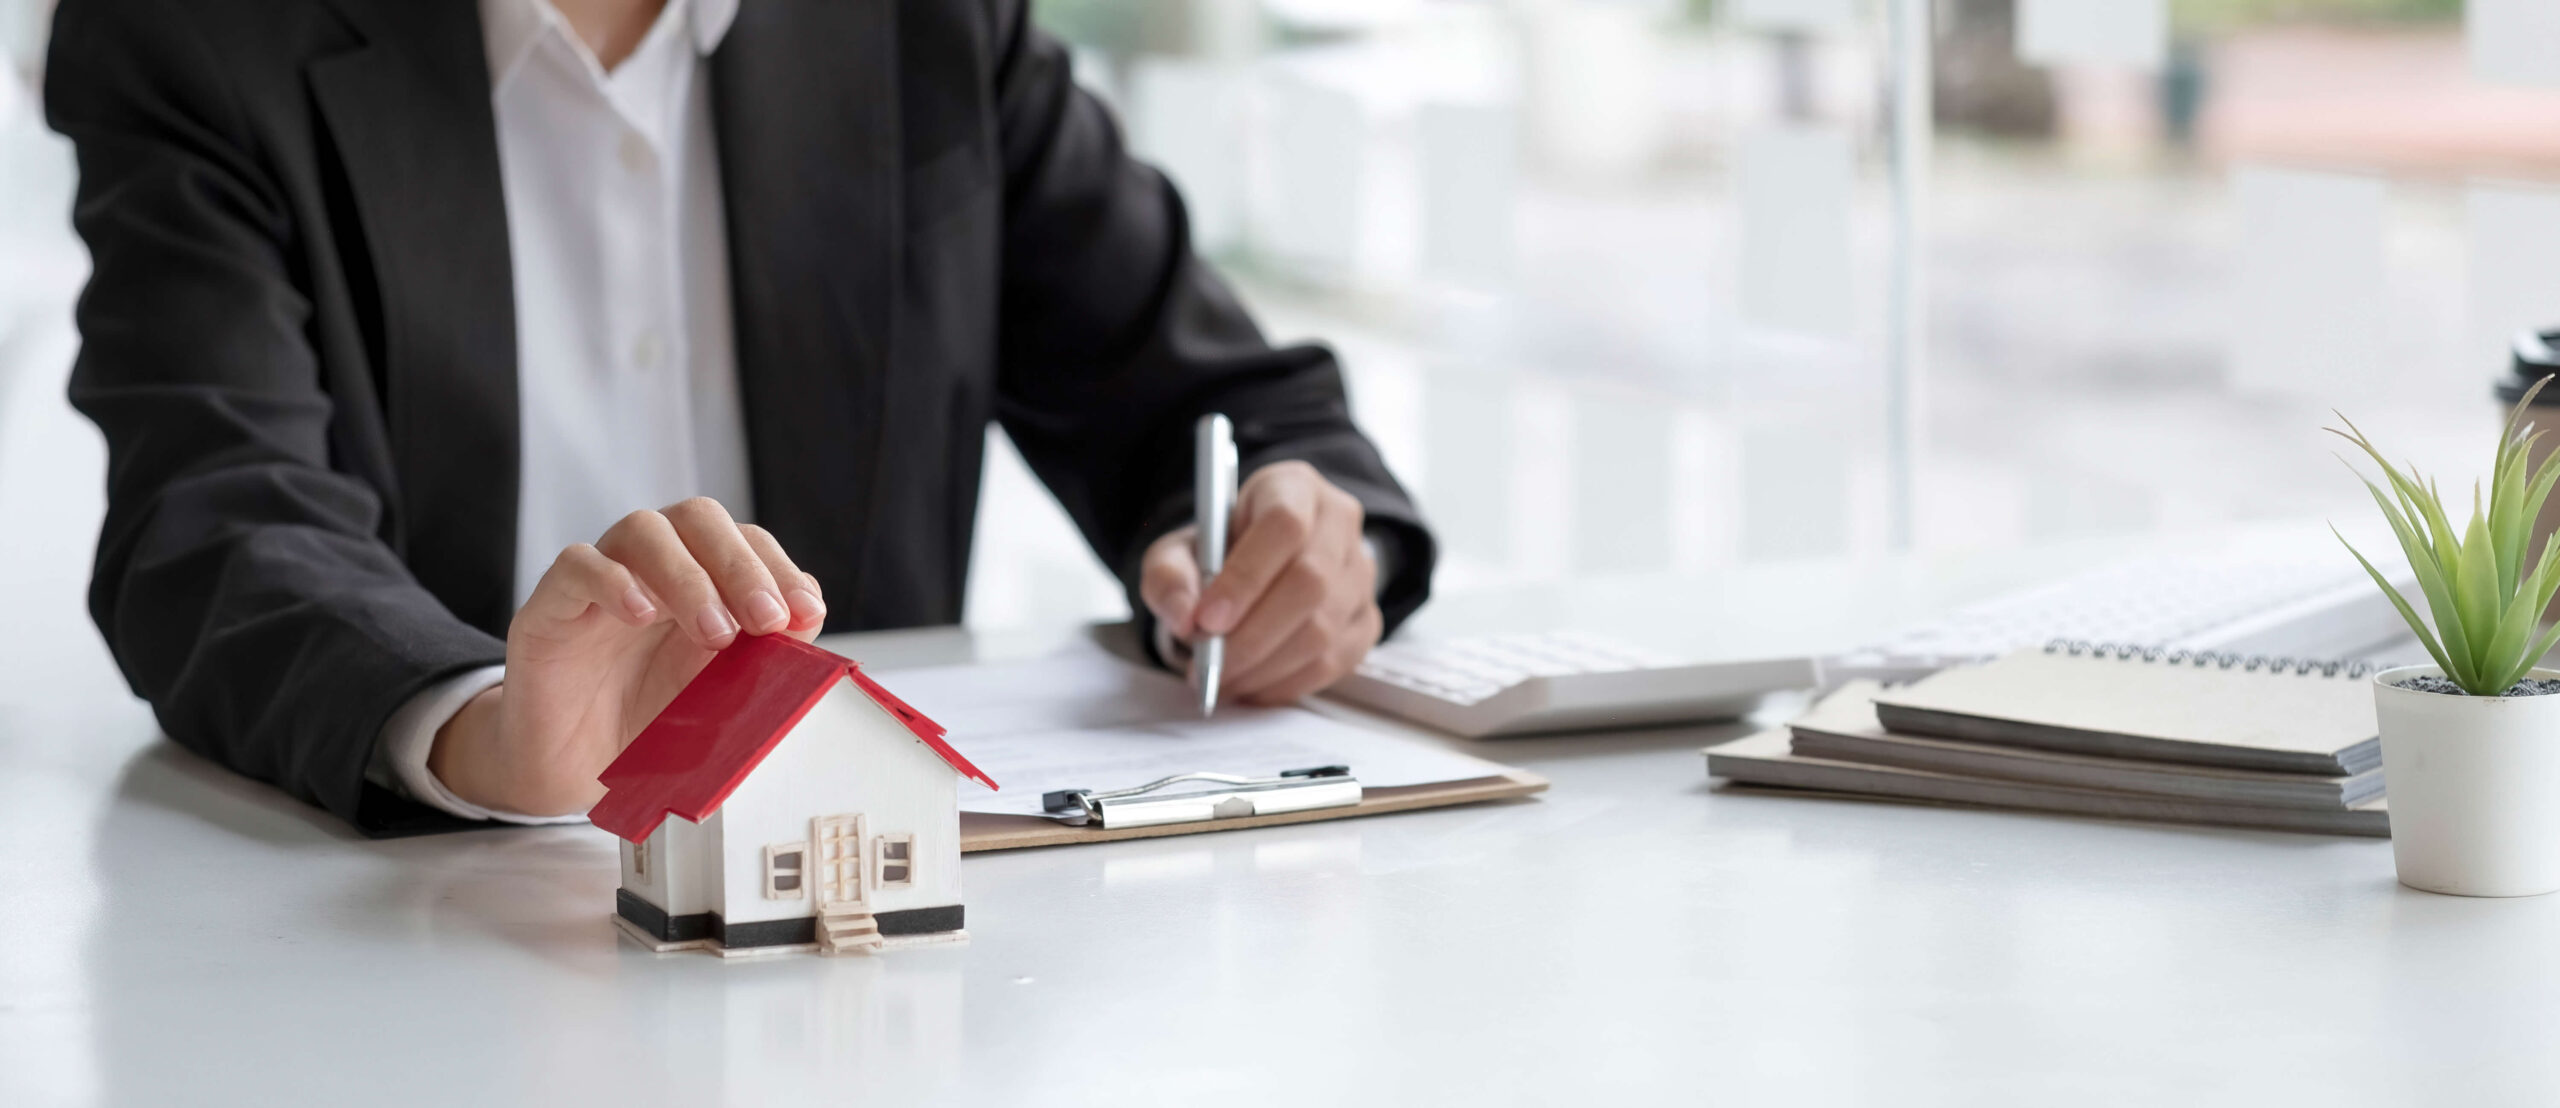 The importance of reviewing your home loan regularly